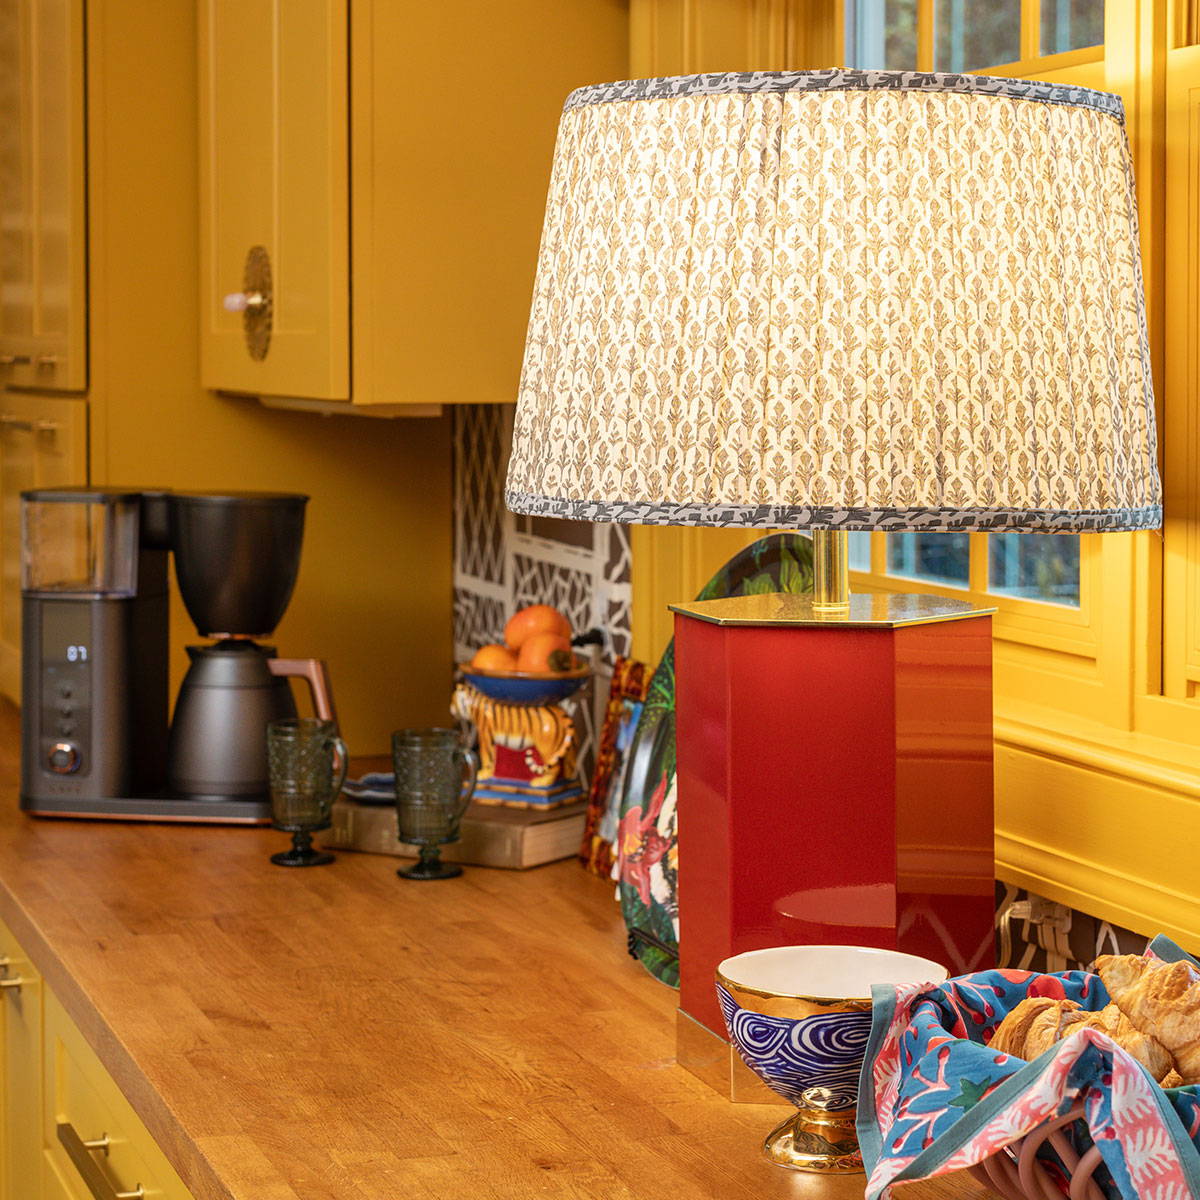 Custom fabric lampshade with coffee maker in background